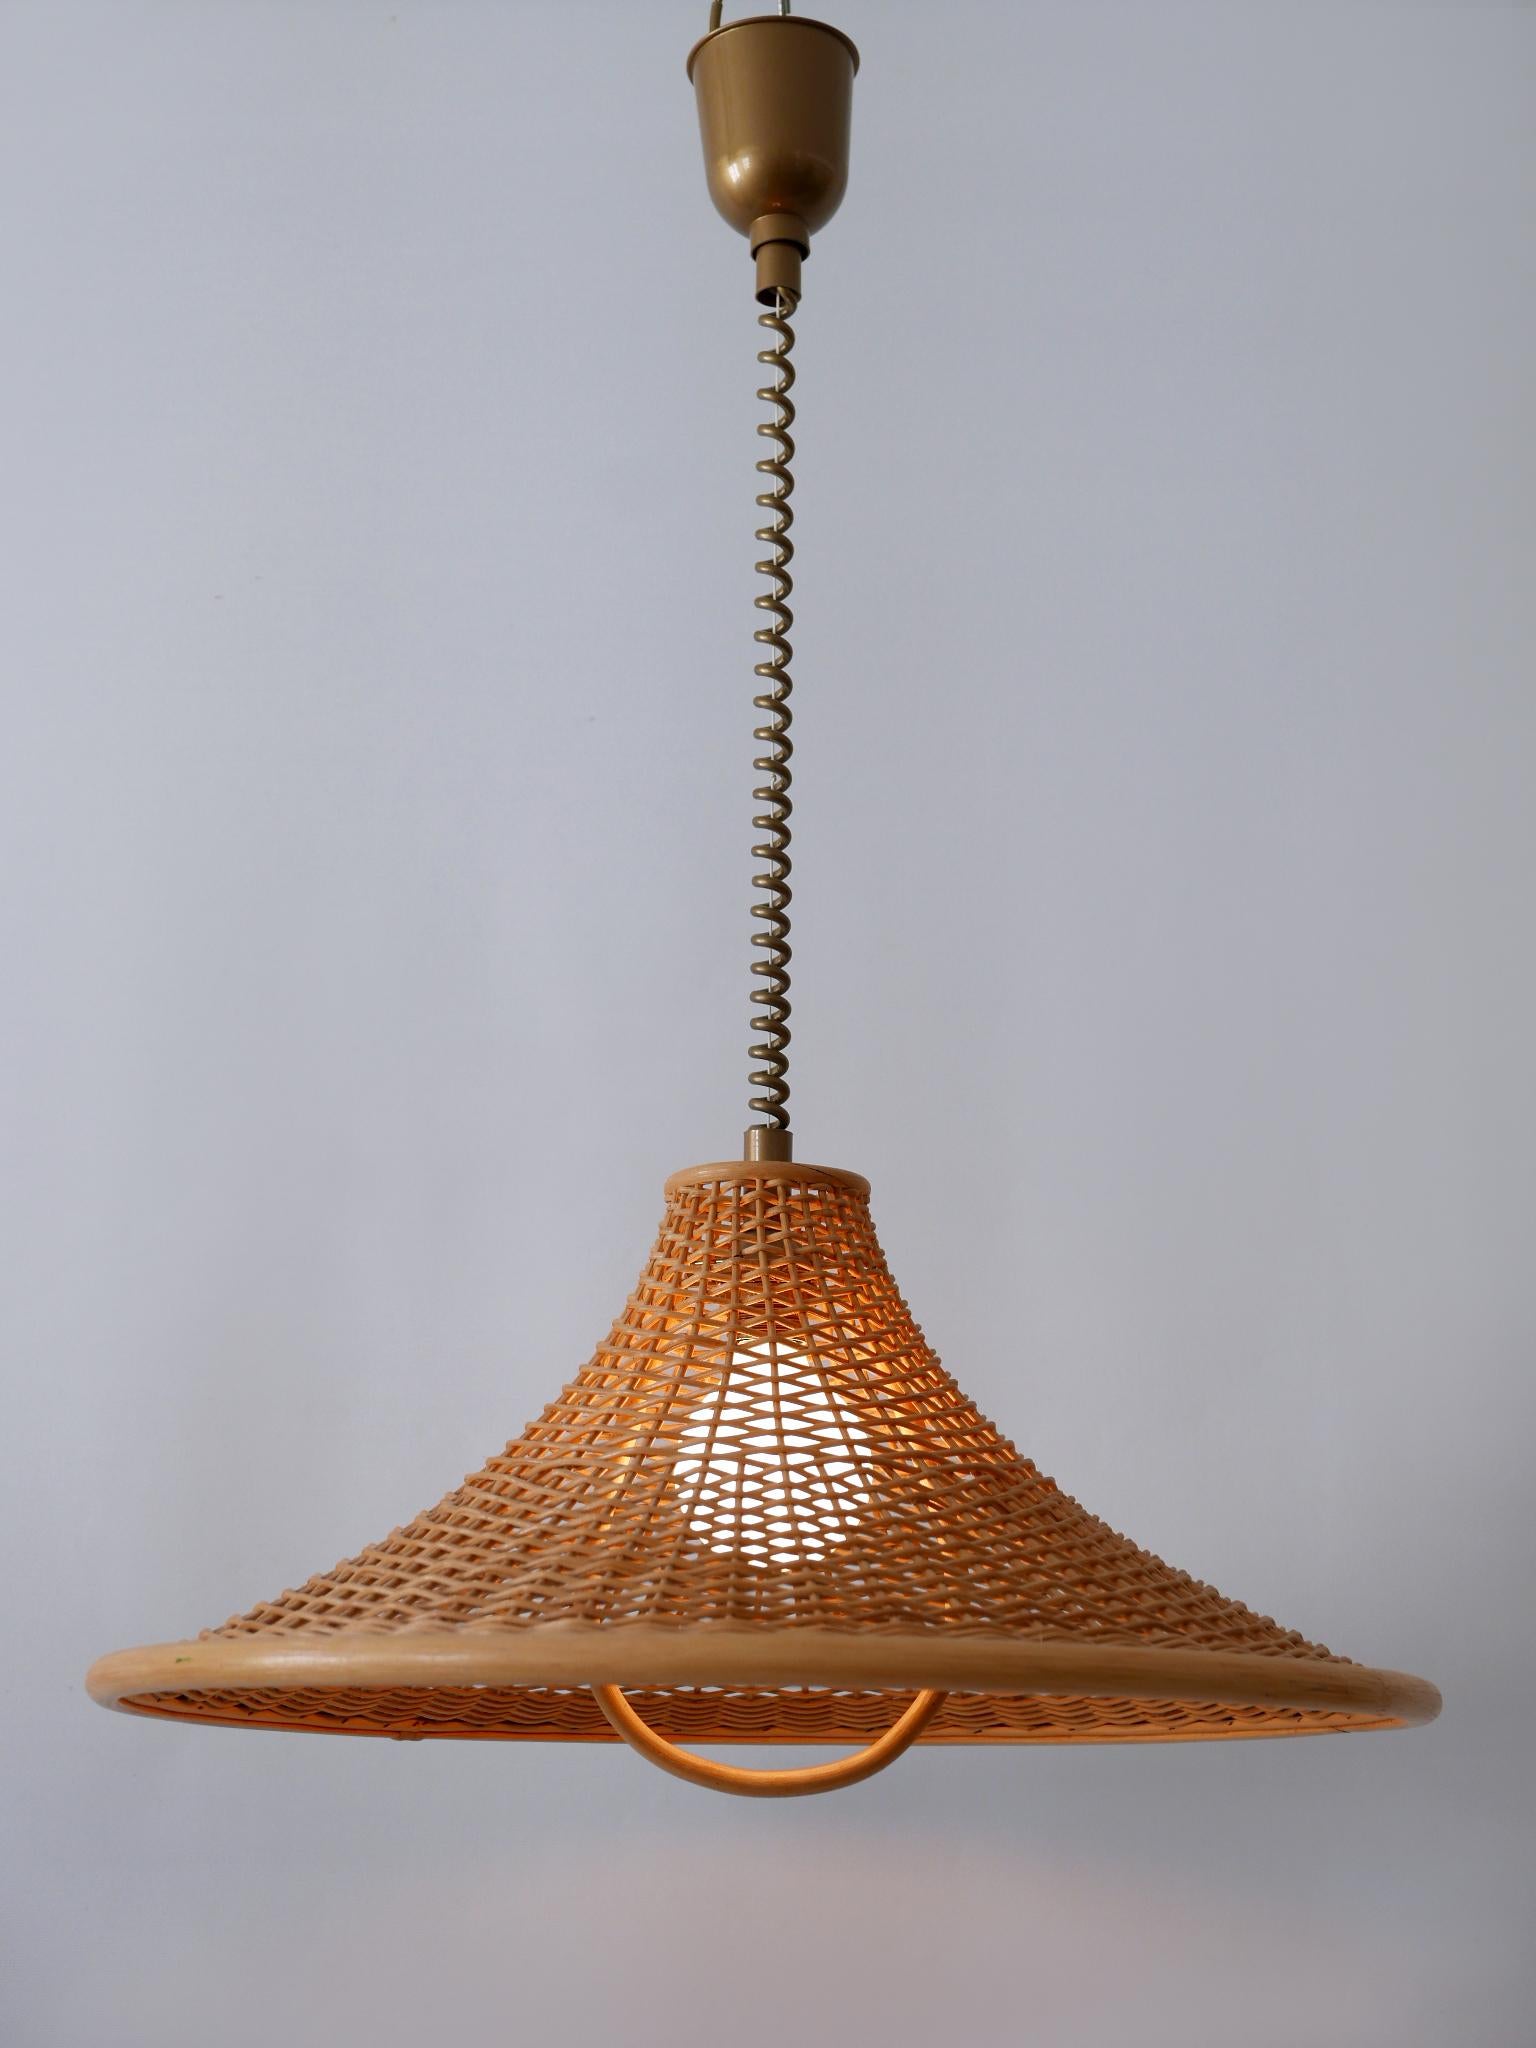 Large and highly decorative Mid-Century Modern pull down pendant lamp or hanging light. Manufactured probably in 1970s, Germany.

Executed in wicker, it comes with 1 x E27 Edison screw fit bulb holder, is wired and in working condition. It runs